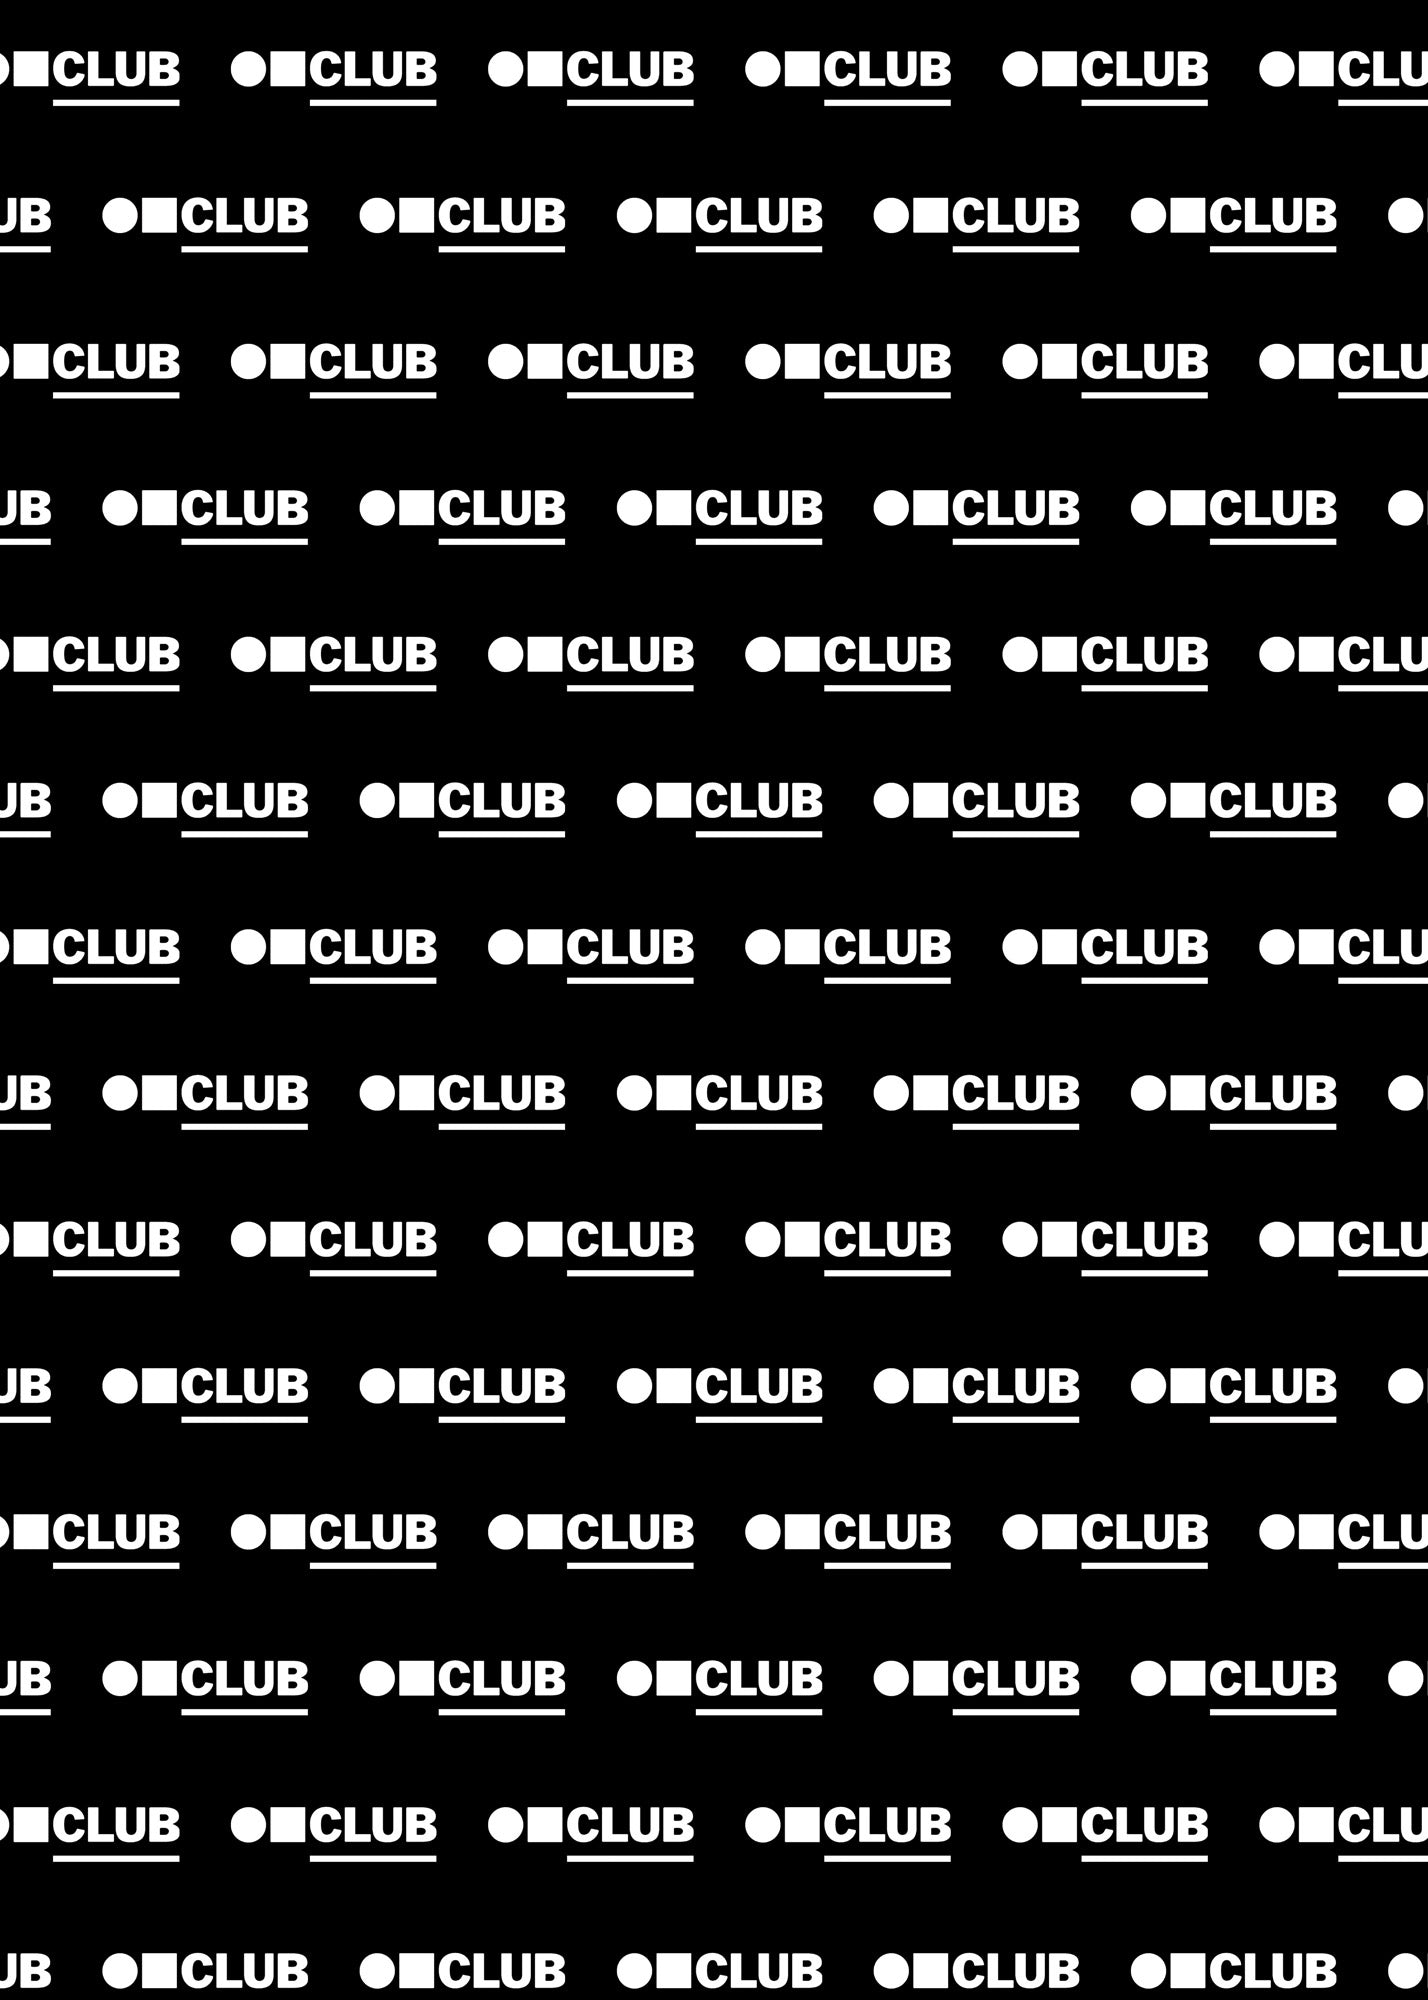 Custom Repeating Logo Large Vinyl Photography Backdrop by Club Backdrops